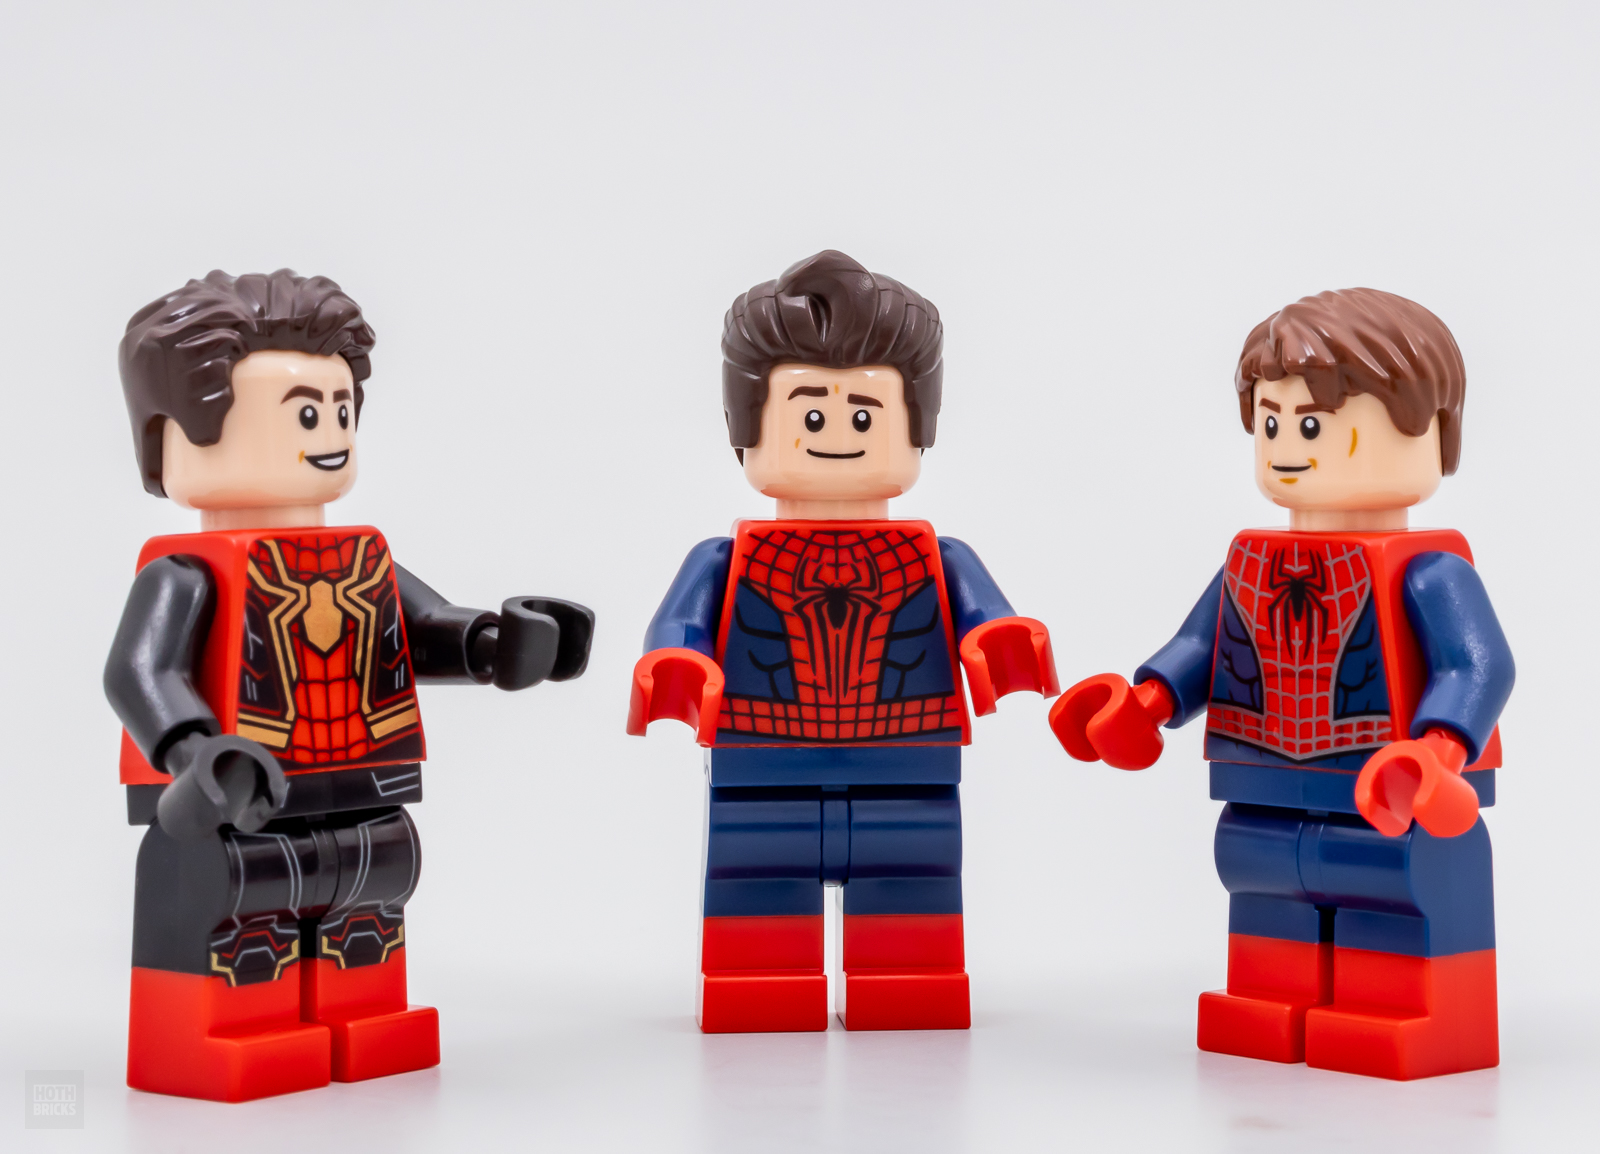 Spider-Man No Way Home and Avengers Endgame Final Battle Legos